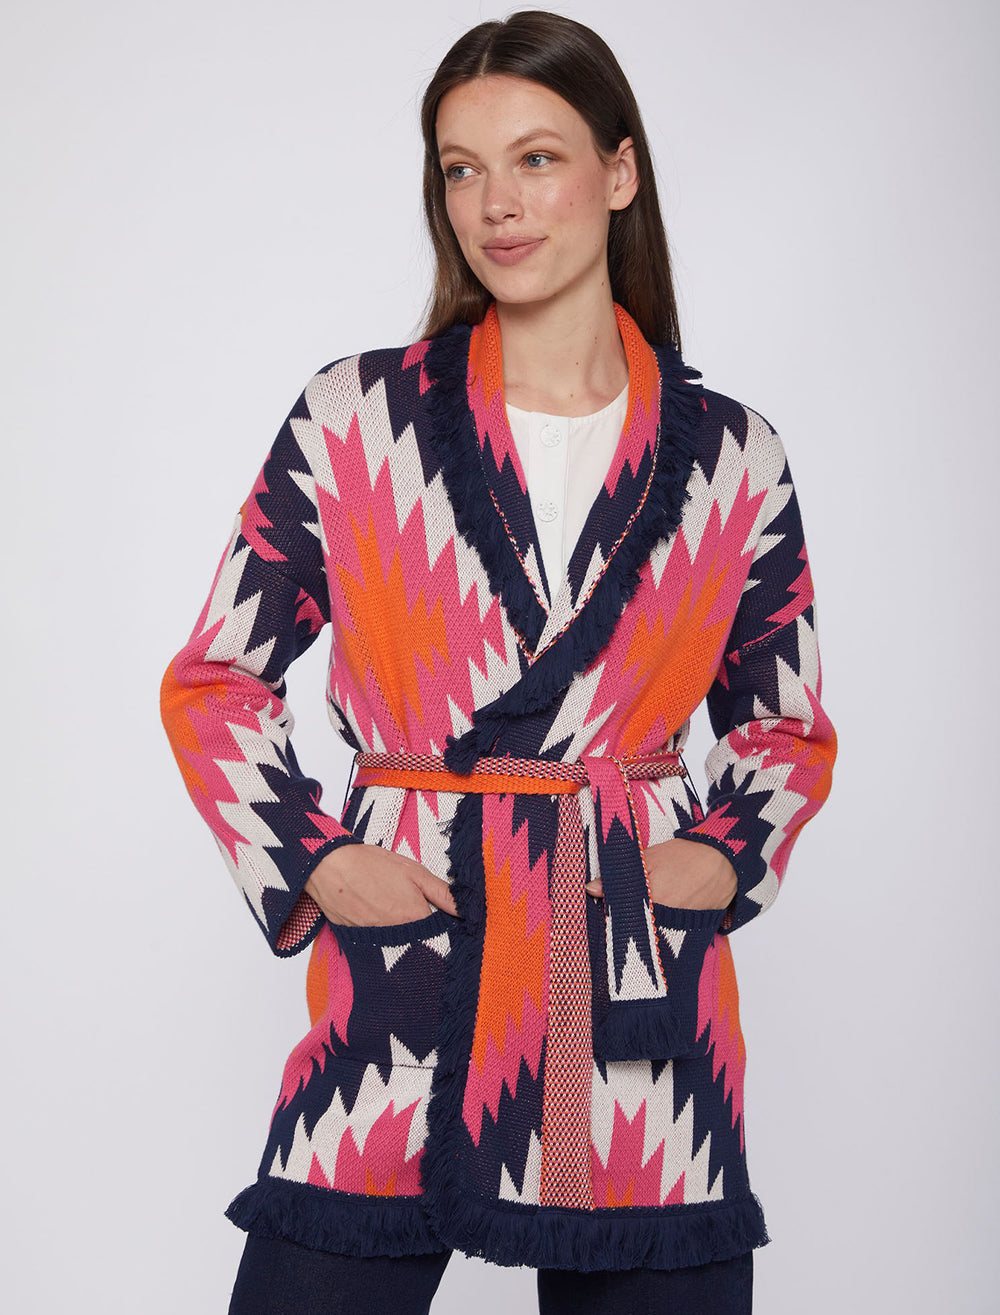 Model wearing Vilagallo's Wrap Cardigan in Pink and Navy Multi.